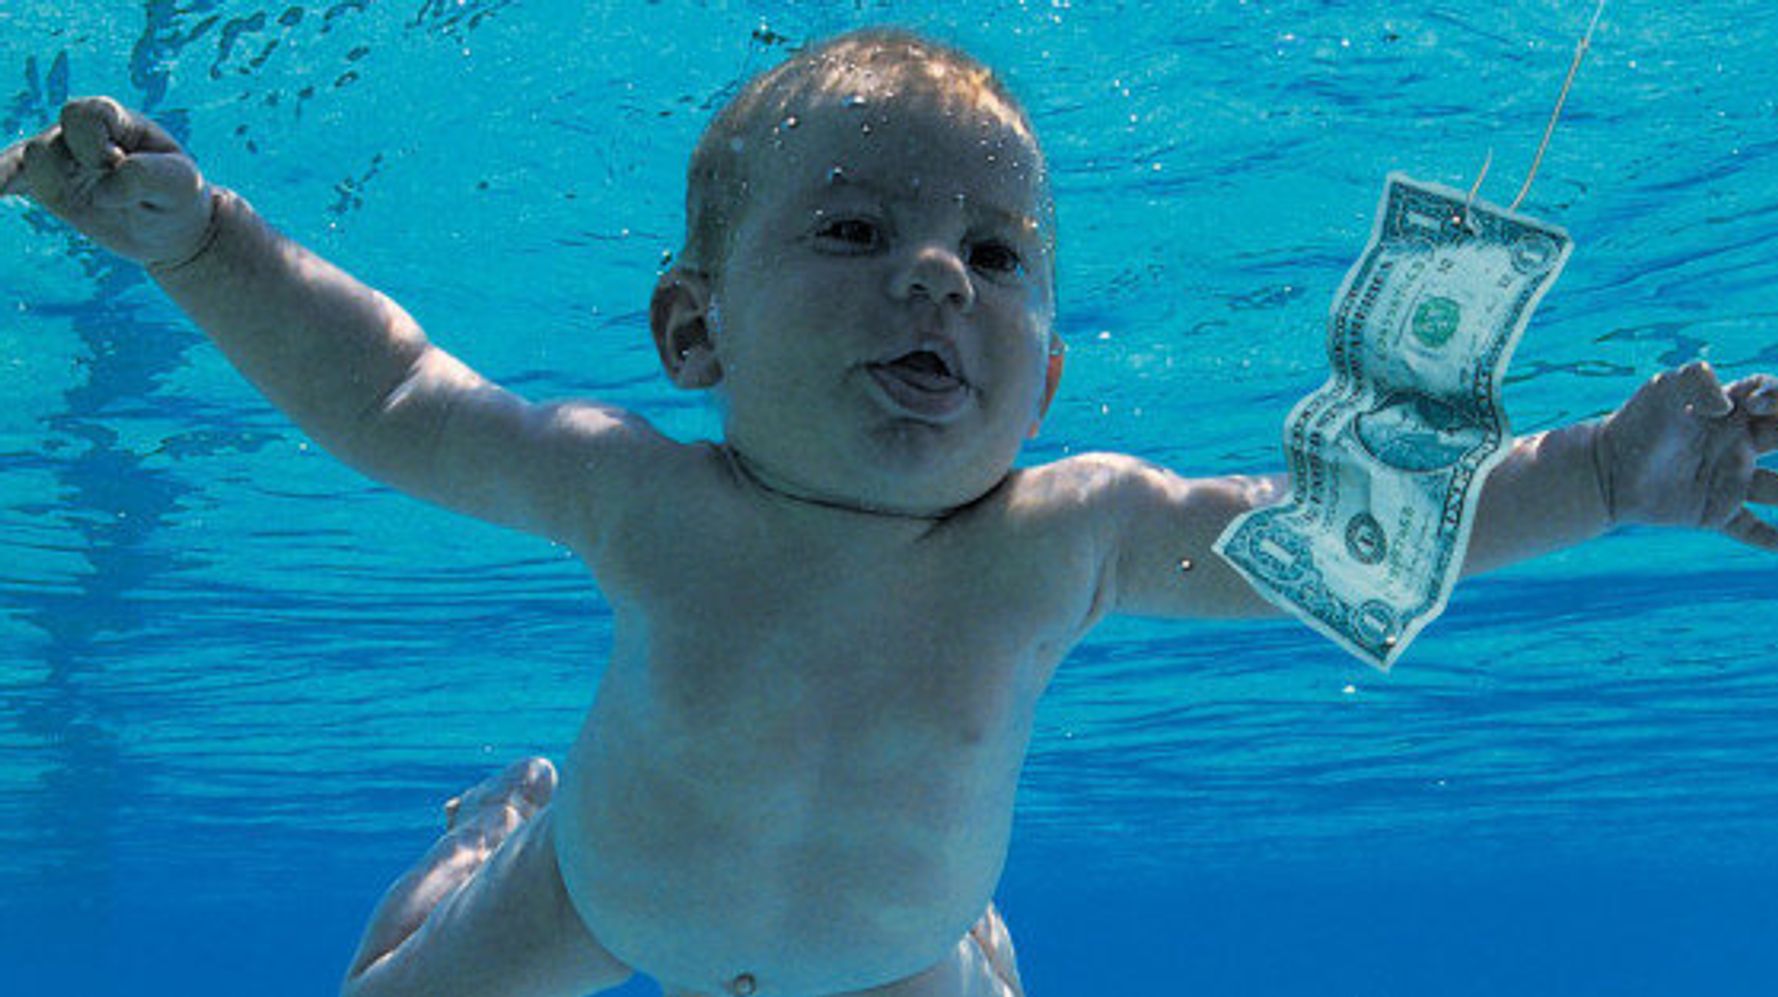 Nirvanas Nevermind Baby Recreates Iconic Cover For 